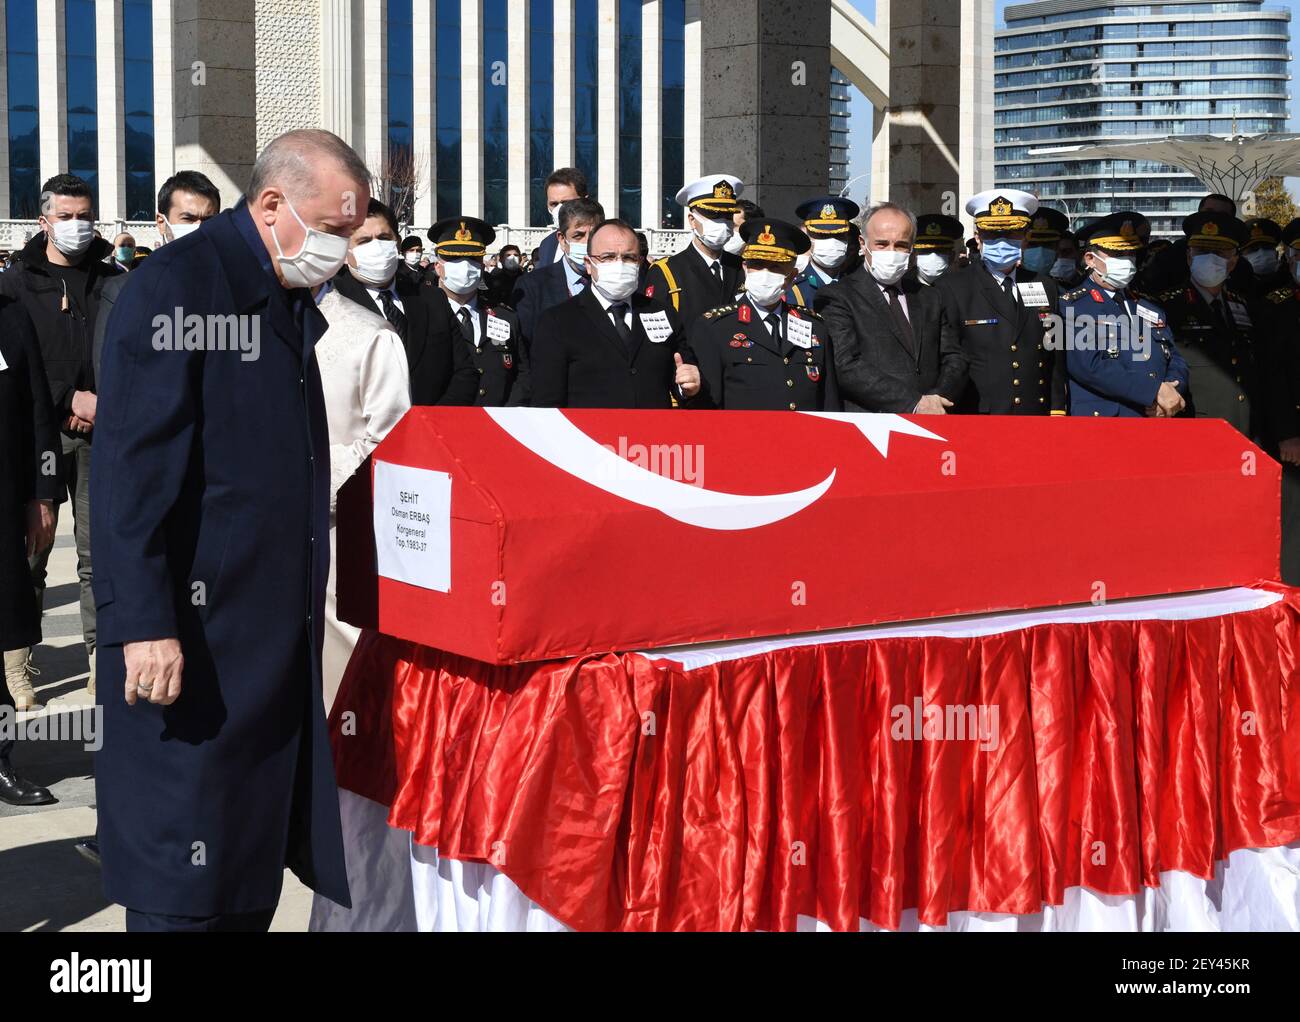 Ankara, Turkey. 05th Mar, 2021. Turkey's President Recep Tayyip Erdogan attends funeral prayers and a ceremony for 11 military personnel, including a high-ranking officer, at Ahmet Hamdi Akseki Mosque, in Ankara, Turkey, Friday, March 5, 2021. Turkish army officers were killed on Thursday when an army helicopter crashed in a snow-covered mountainous area in Bitlis, eastern Turkey. Photo by Depo Photos/ABACAPRESS.COM Credit: Abaca Press/Alamy Live News Stock Photo